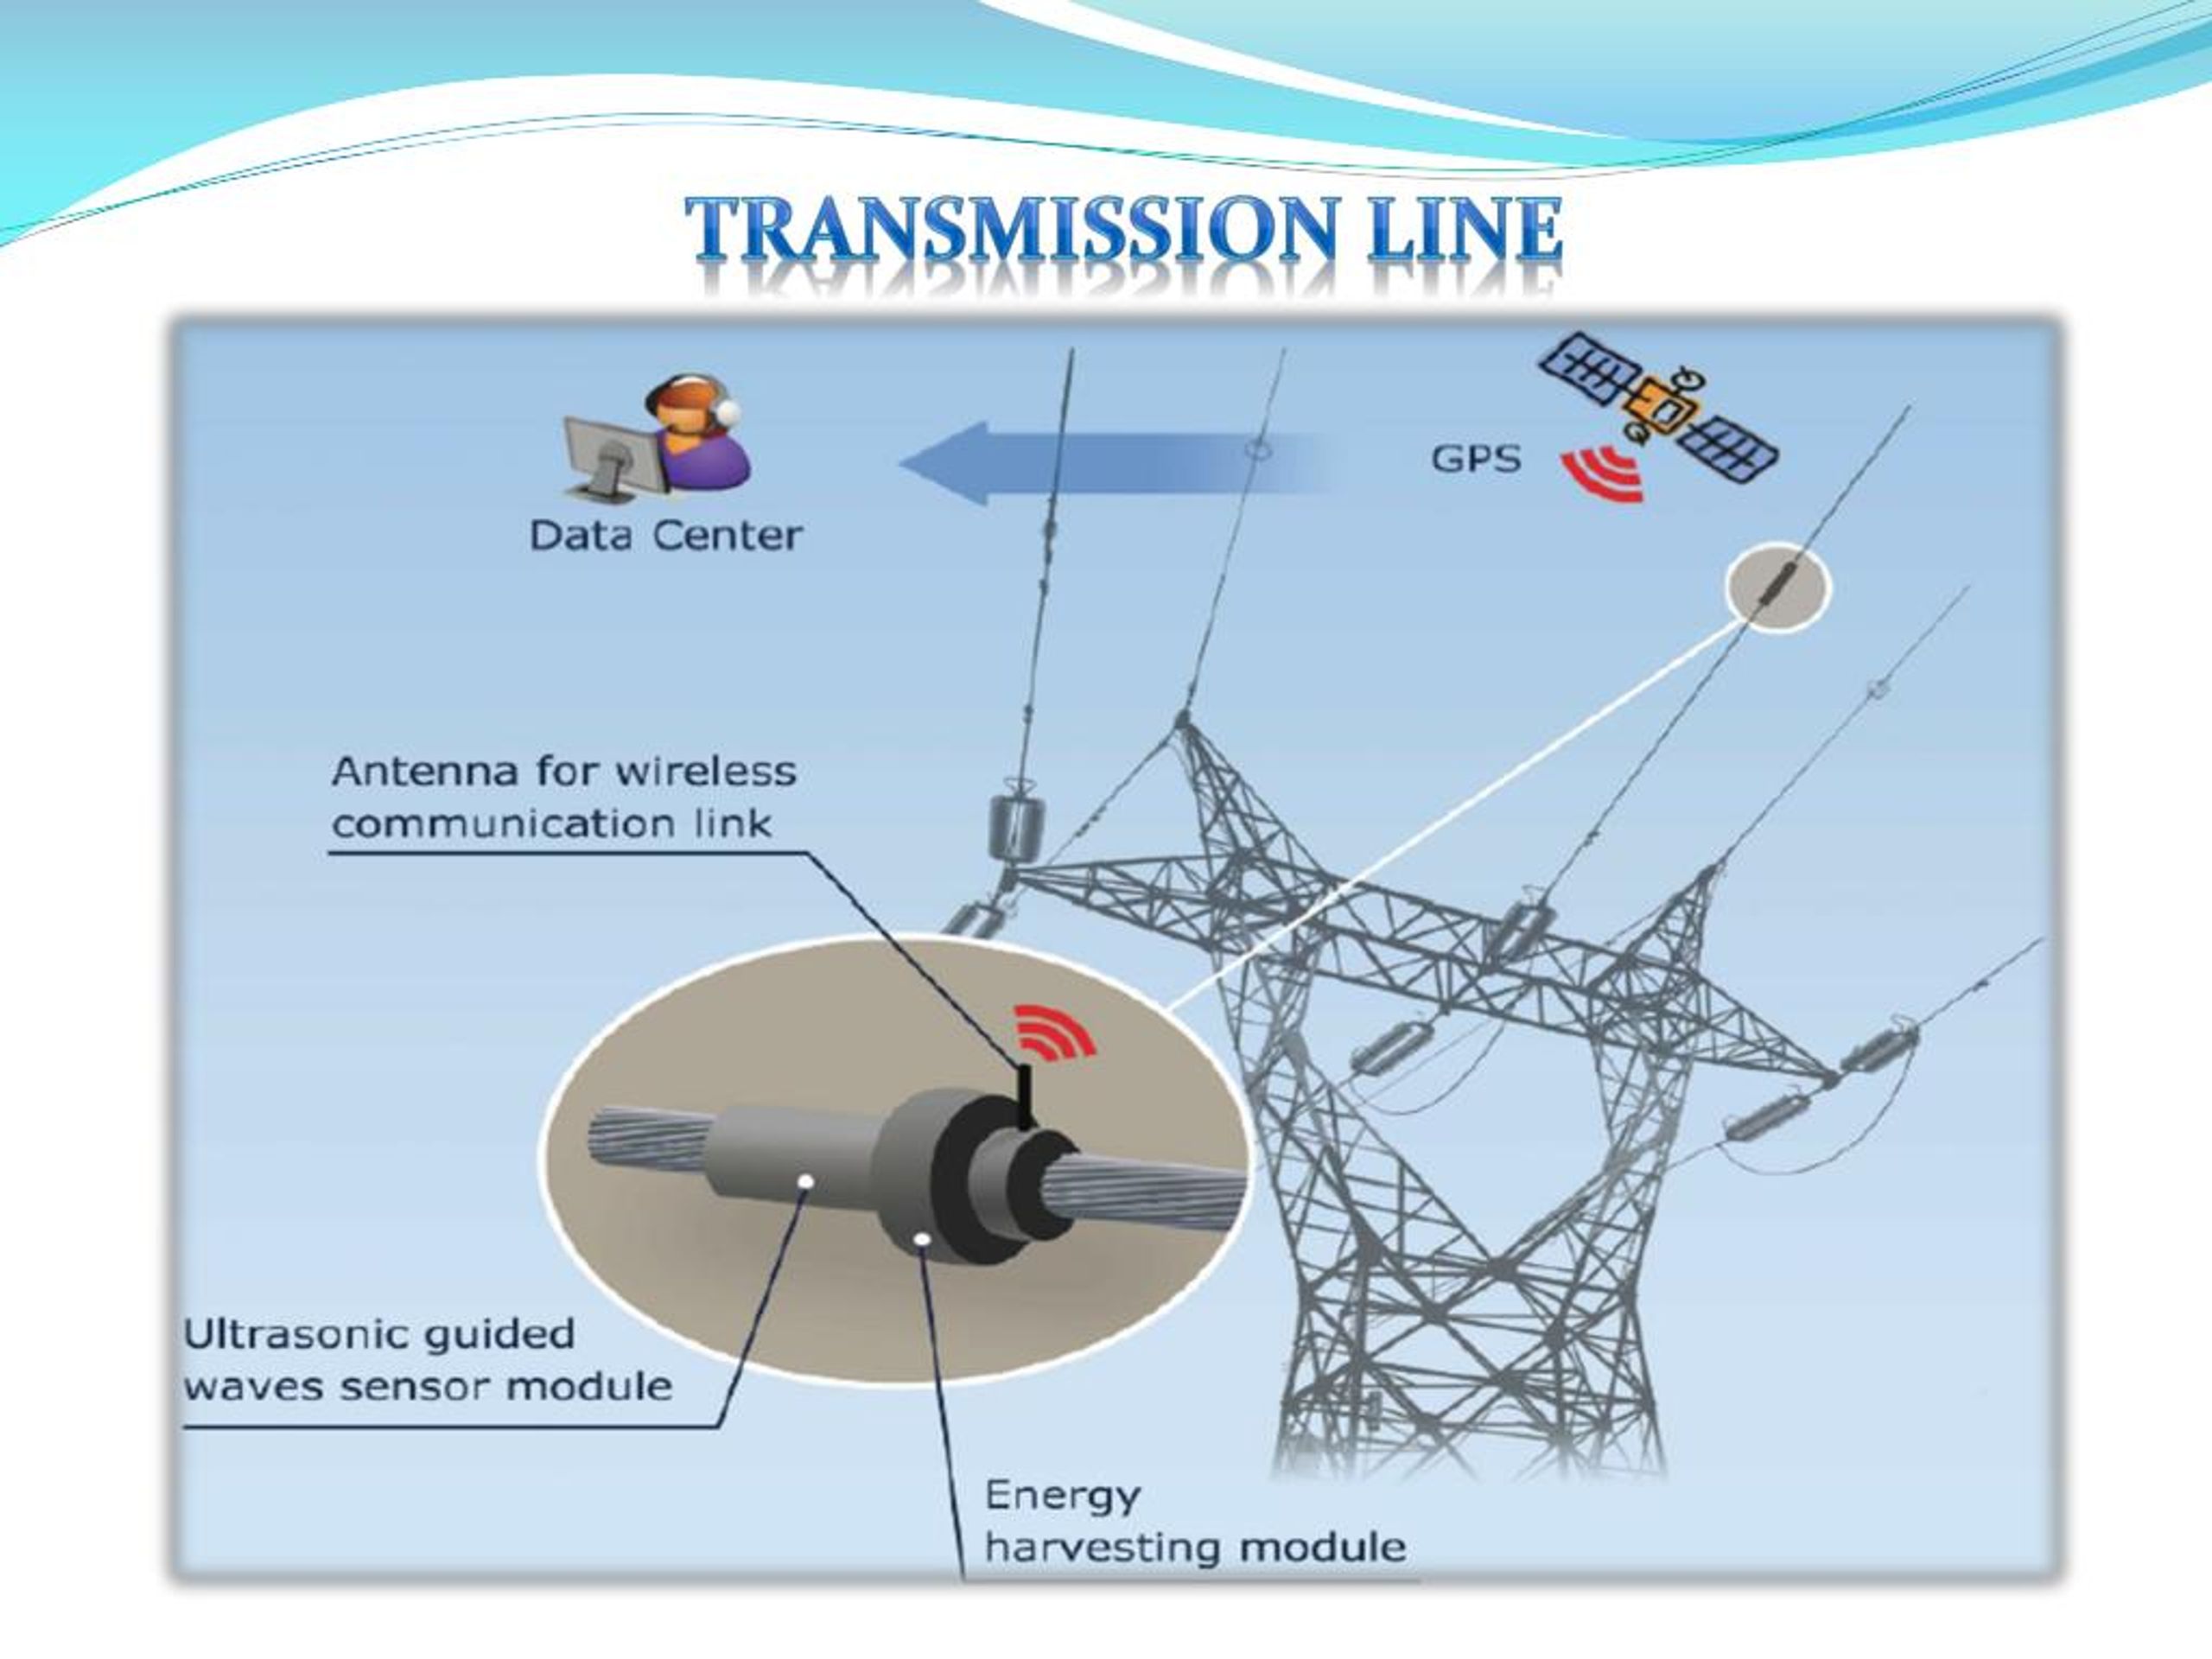 give a presentation on the importance of transmission lines